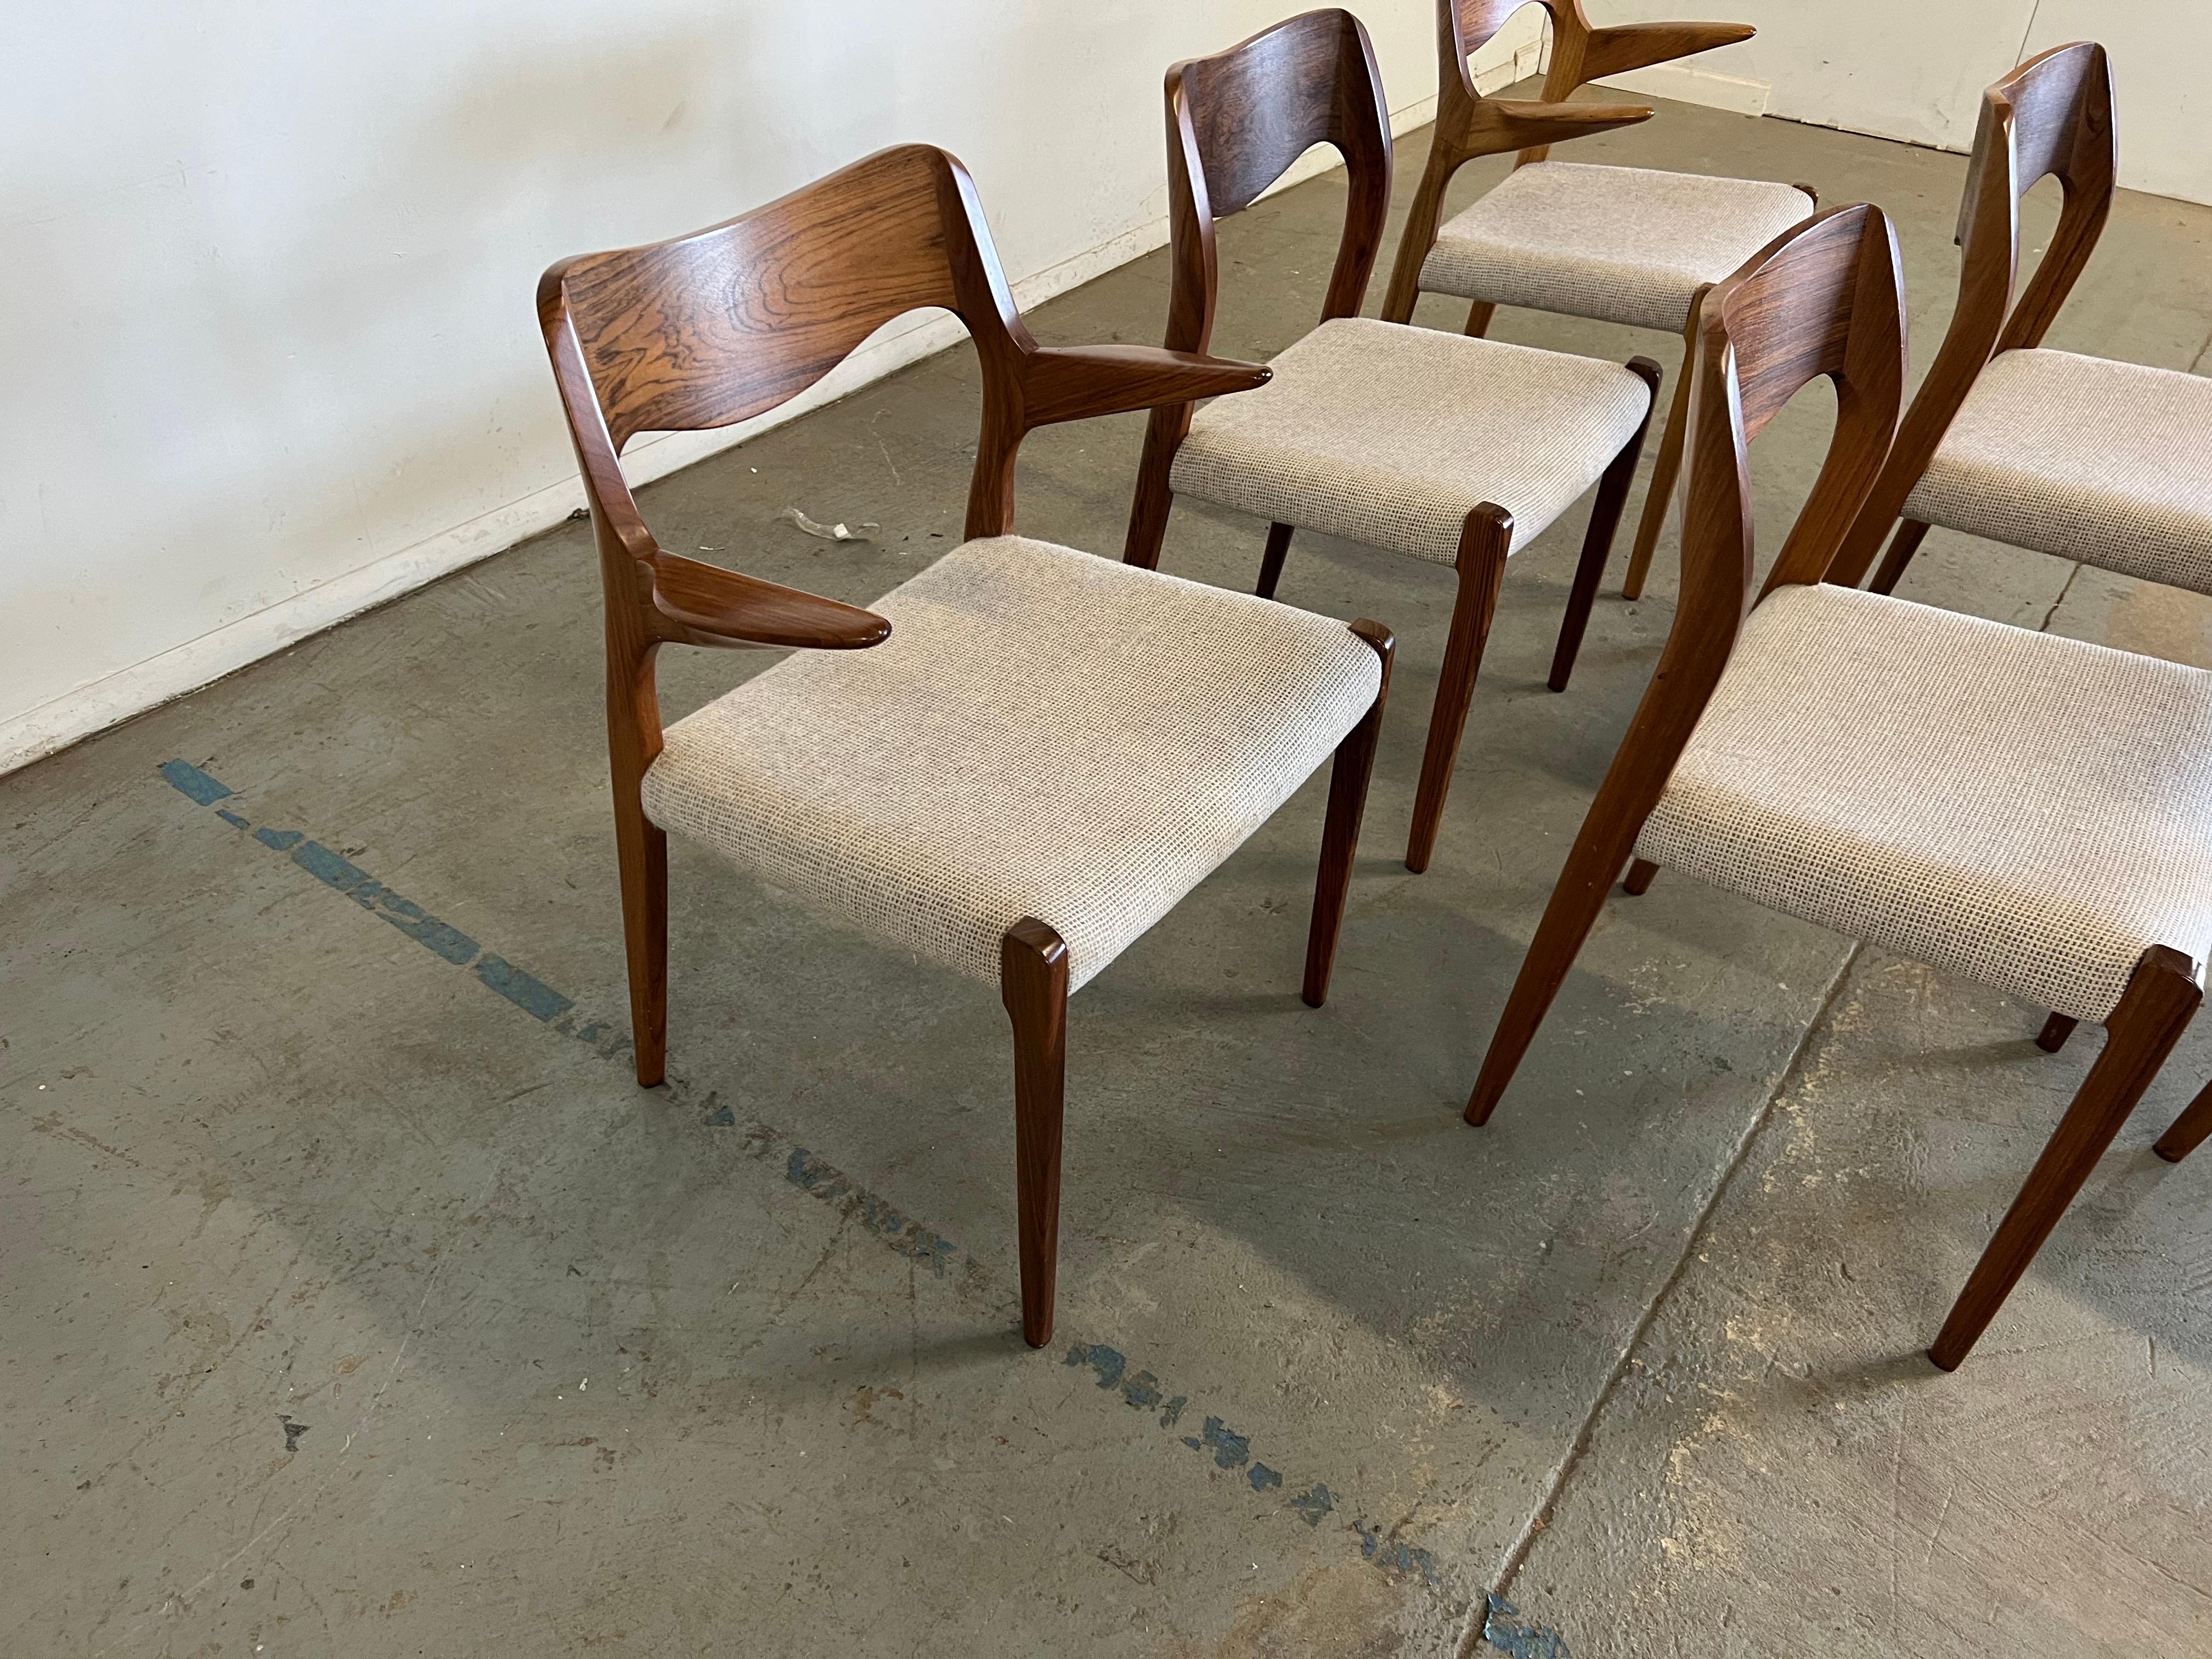 Mid-Century Danish Modern Rosewood Jl Mollers Model 71 Dining Chairs-Set of 6

Offered is a Set of 6 Mid-Century Danish Modern Rosewood Dining Chairs. The set has great lines and will make a great addition to any room. Includes 2 arm chairs and 4